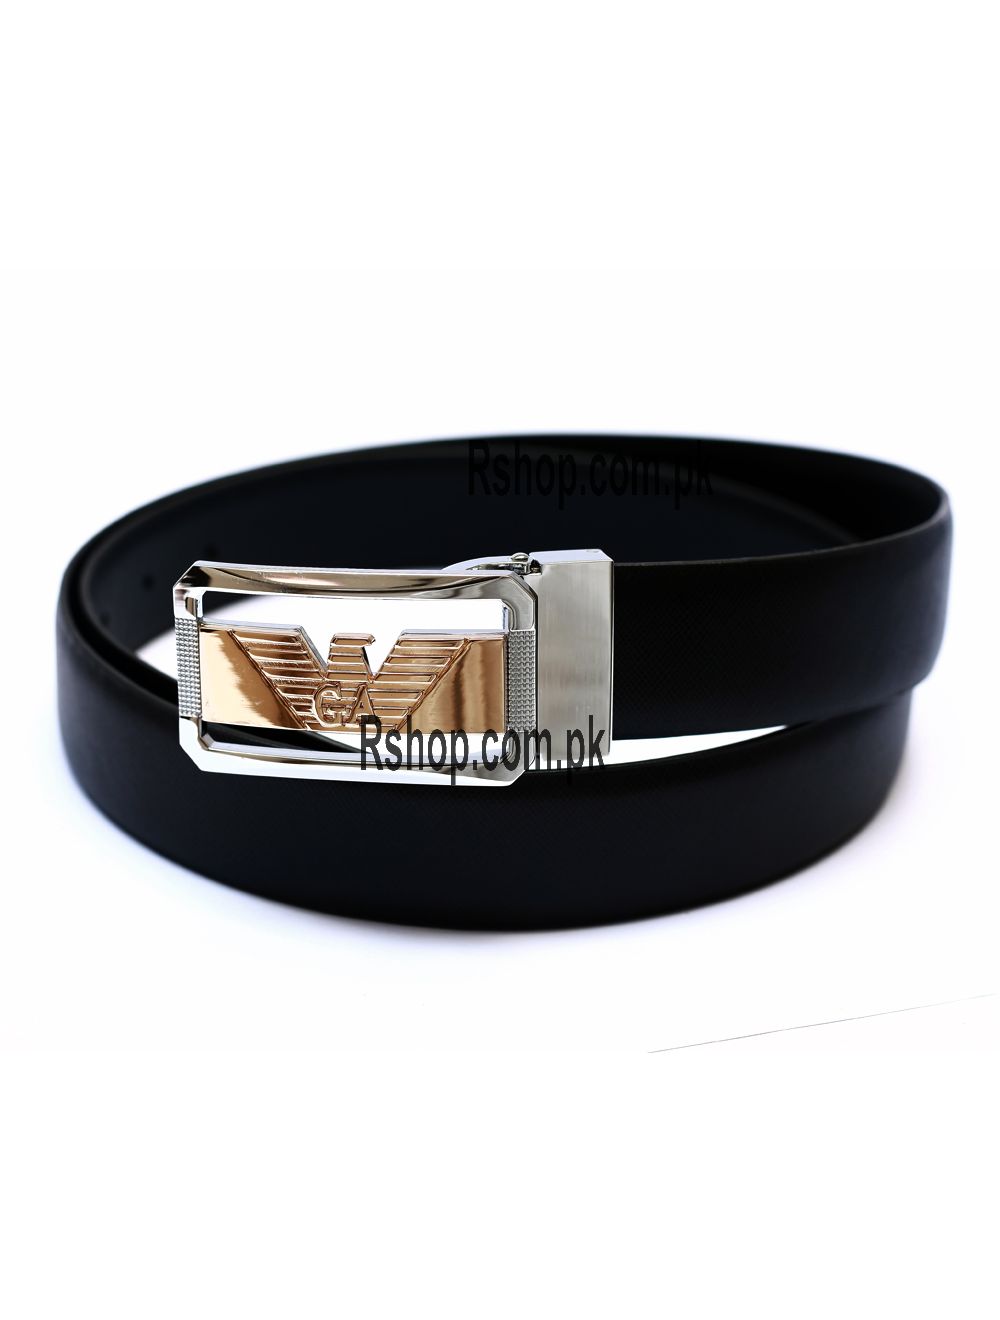 Giorgio Armani belts For Men, Leather belts For Sale, Online belts in  Lahore, Giorgio Armani leather belts